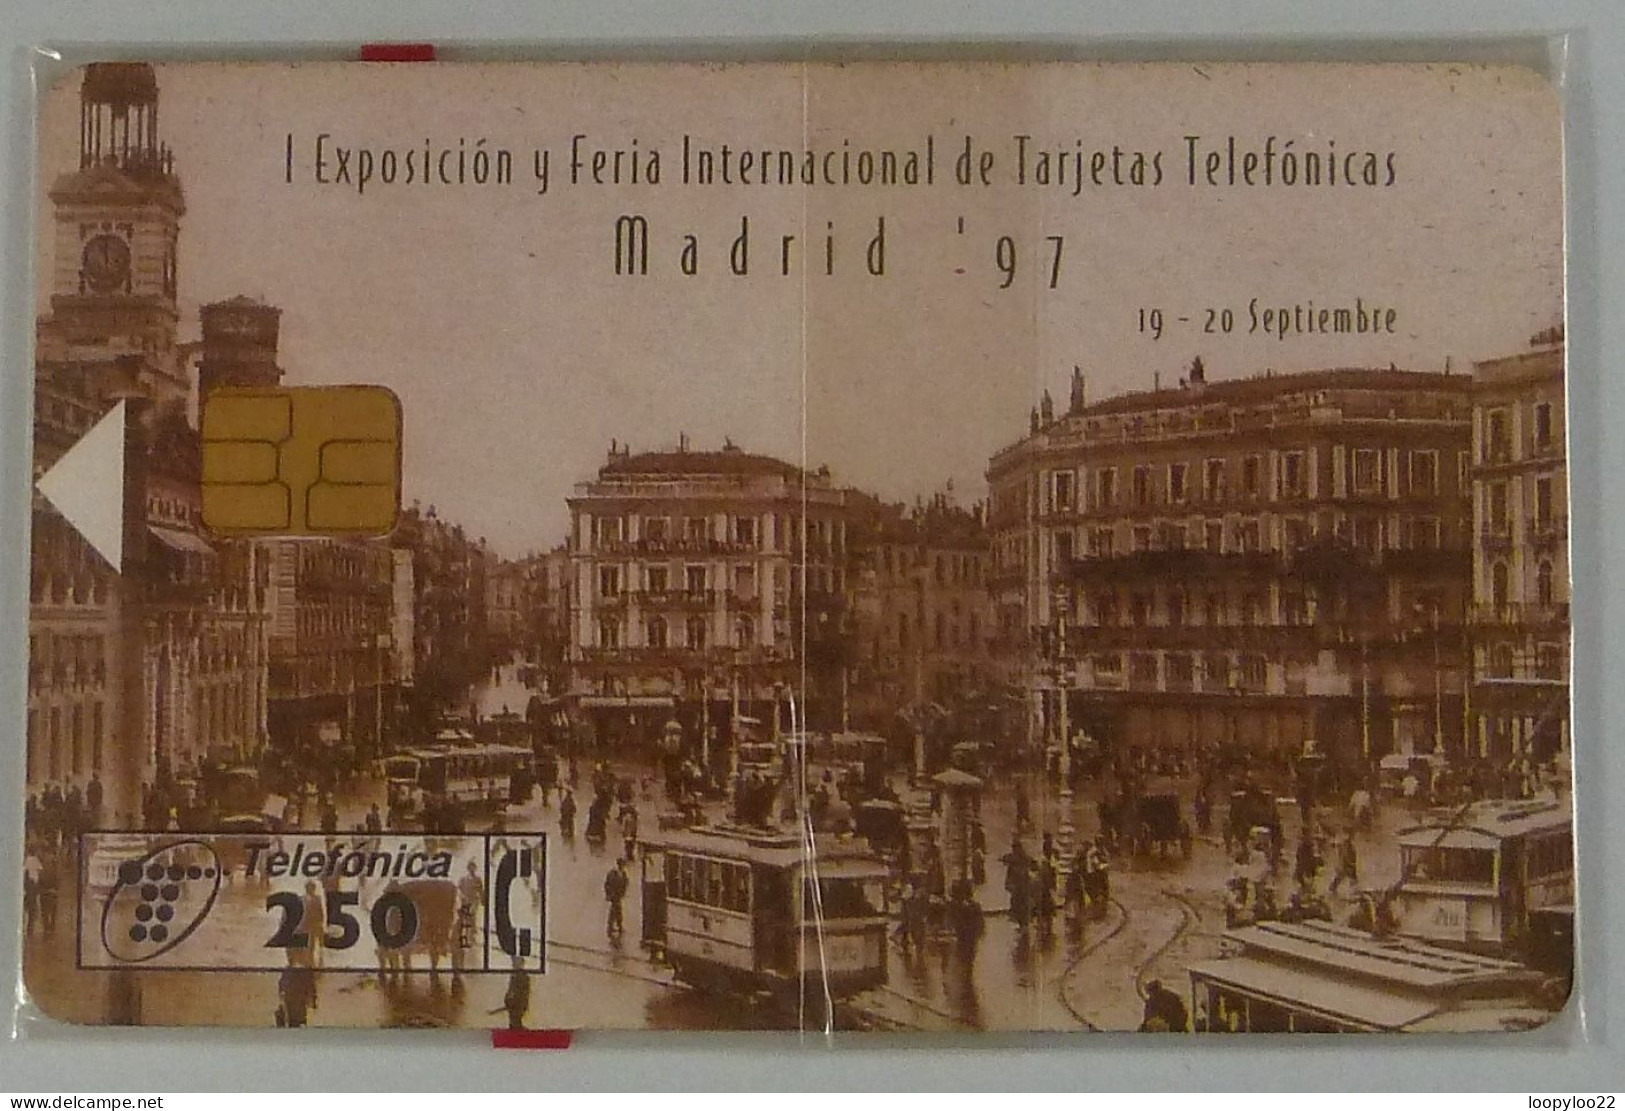 SPAIN - Chip - 250 Units - Madrid '97 - P-283 - 09/97 - Mint Blister - Private Issues